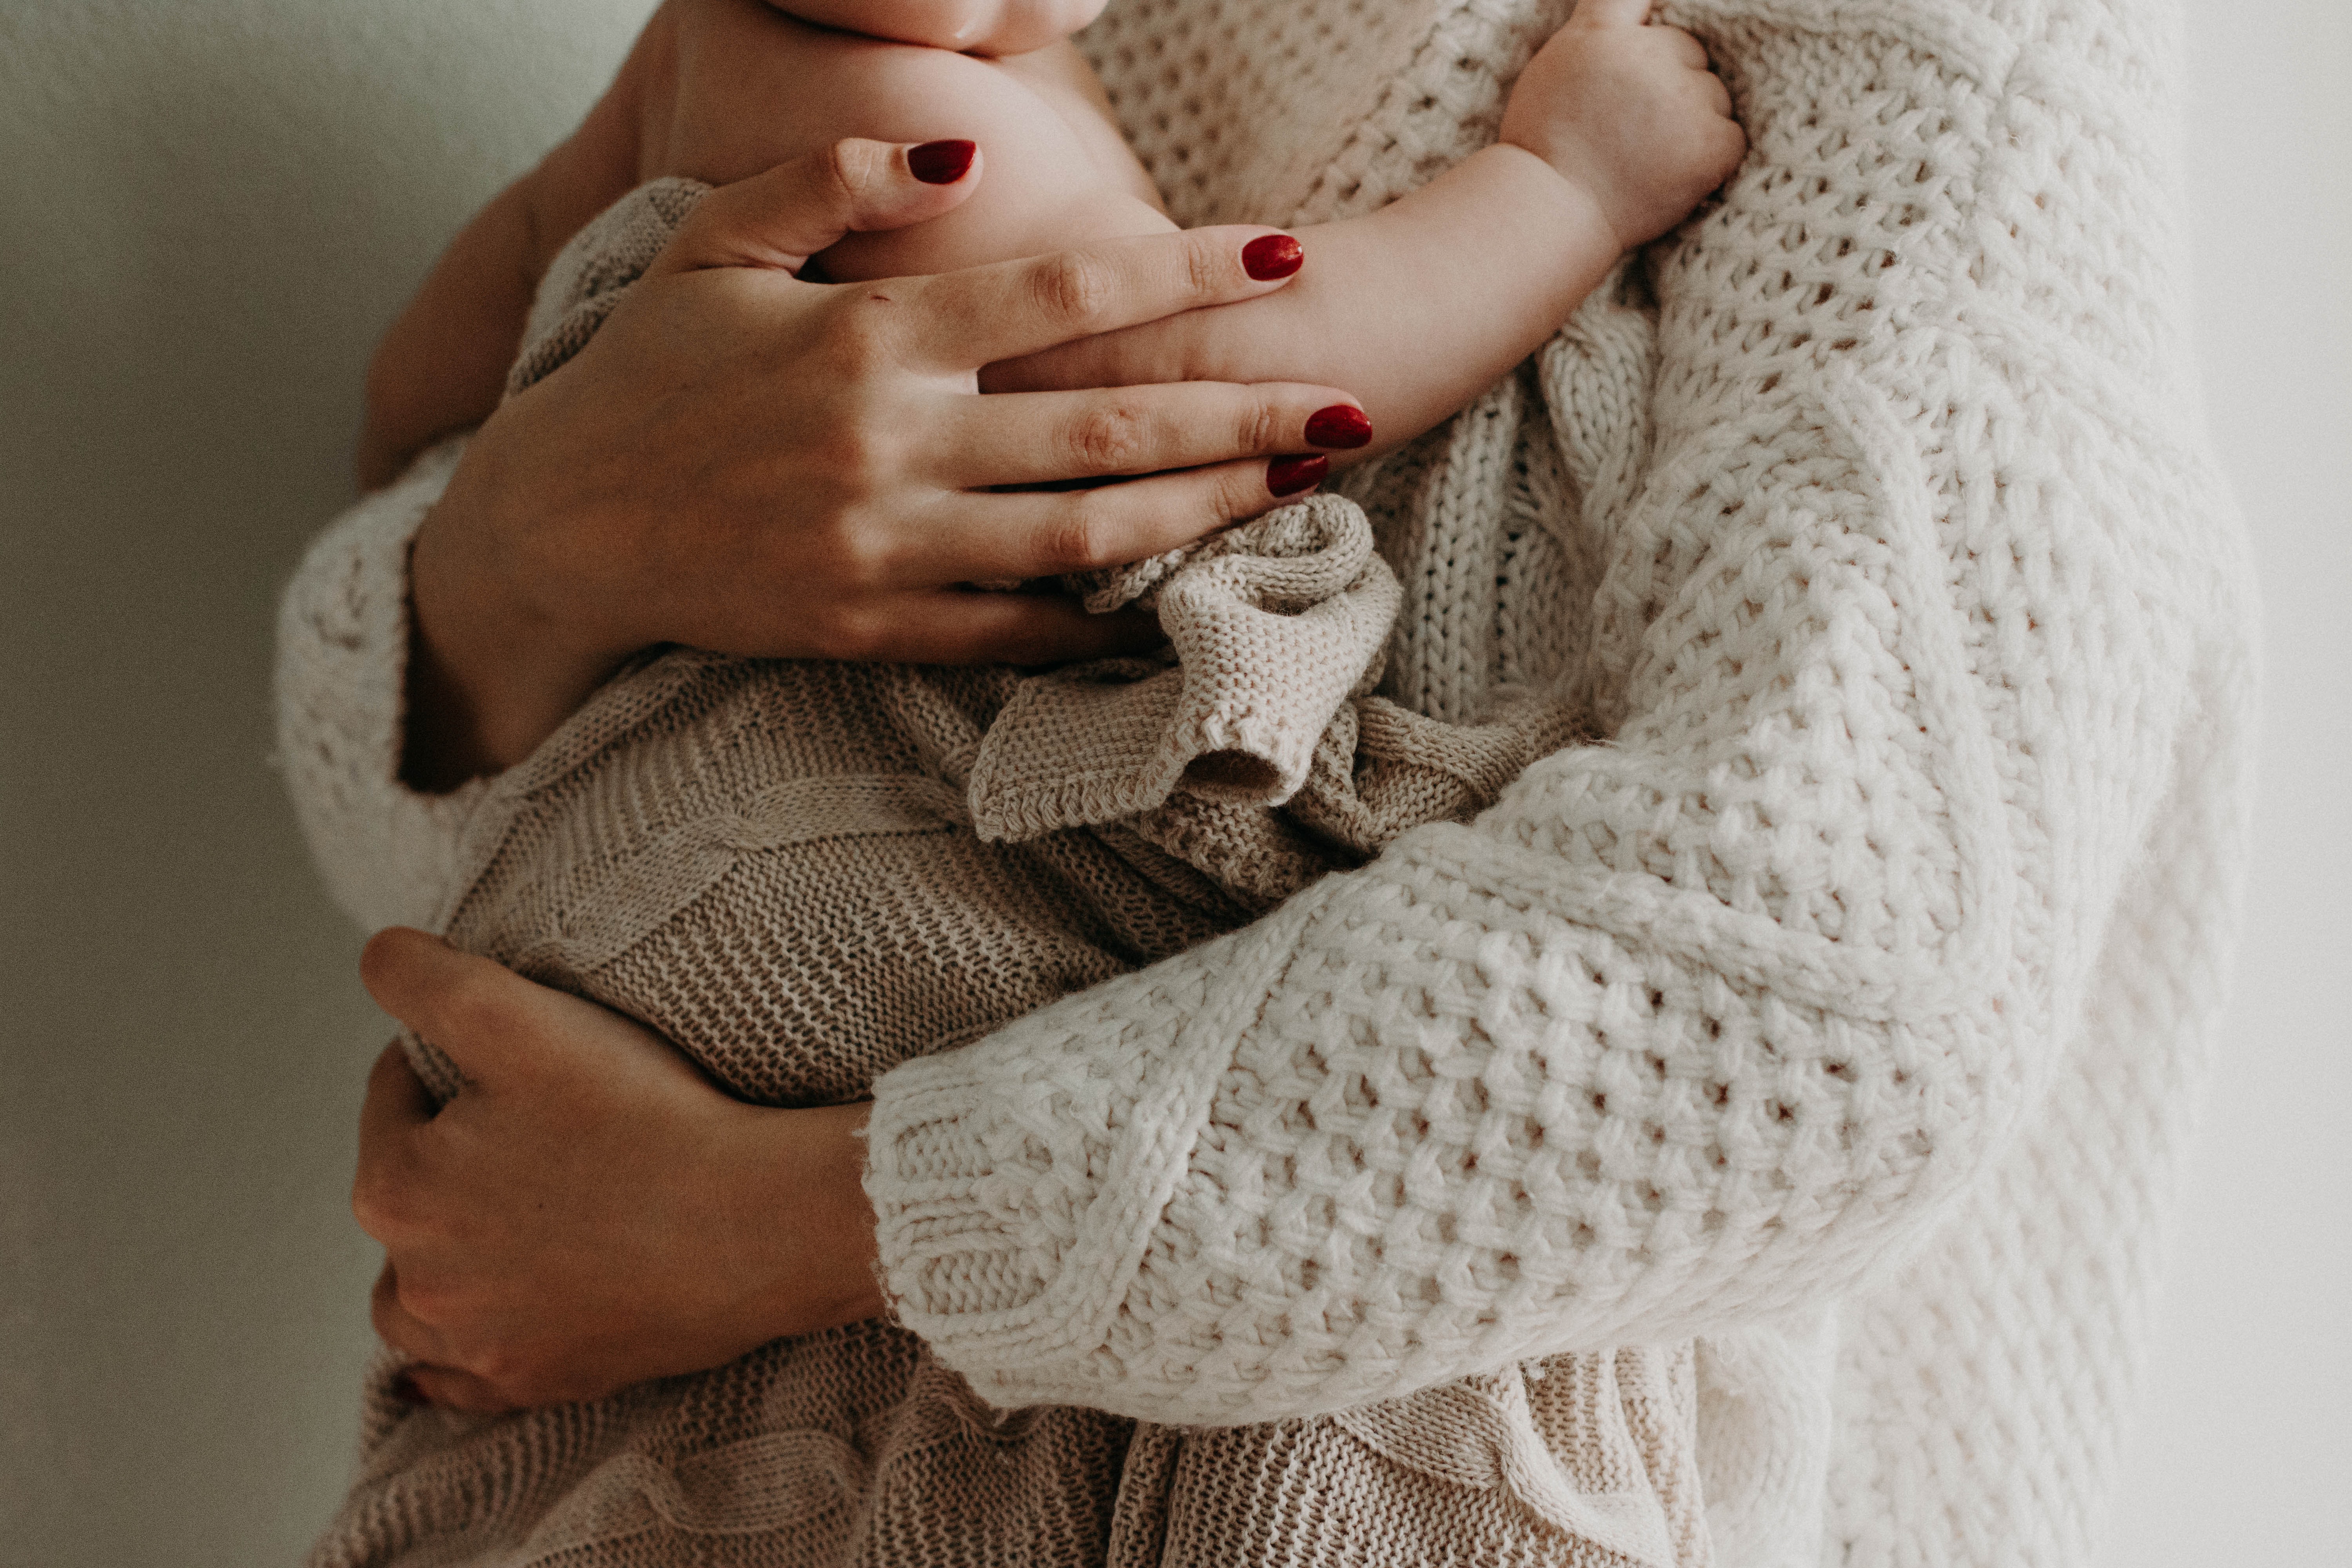 The torso of a woman holding a baby. The woman's jumper and the baby's blanket are in natural earthy colours